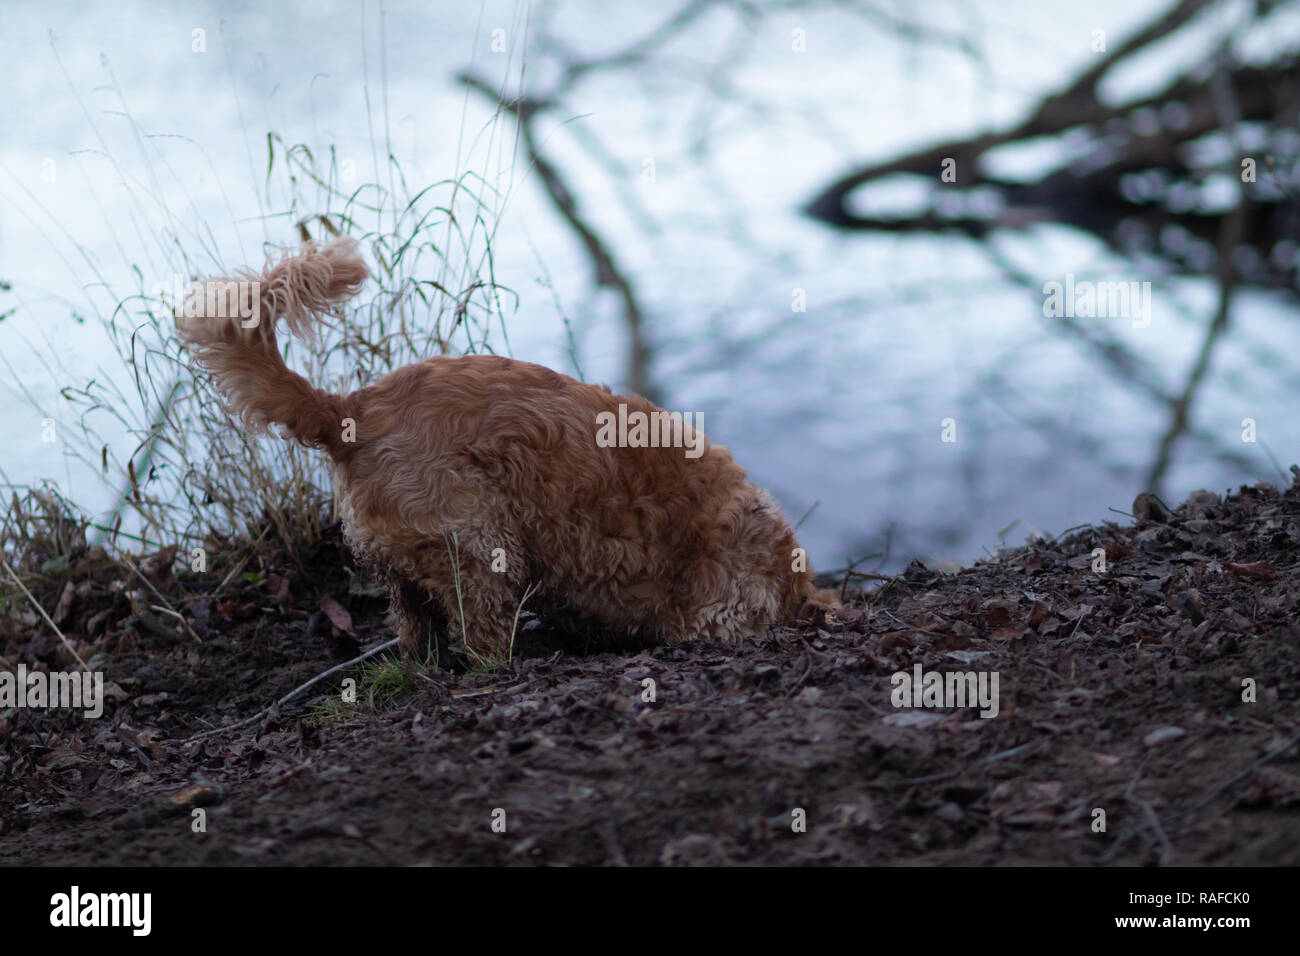 Dog digging with head in ground by river Stock Photo